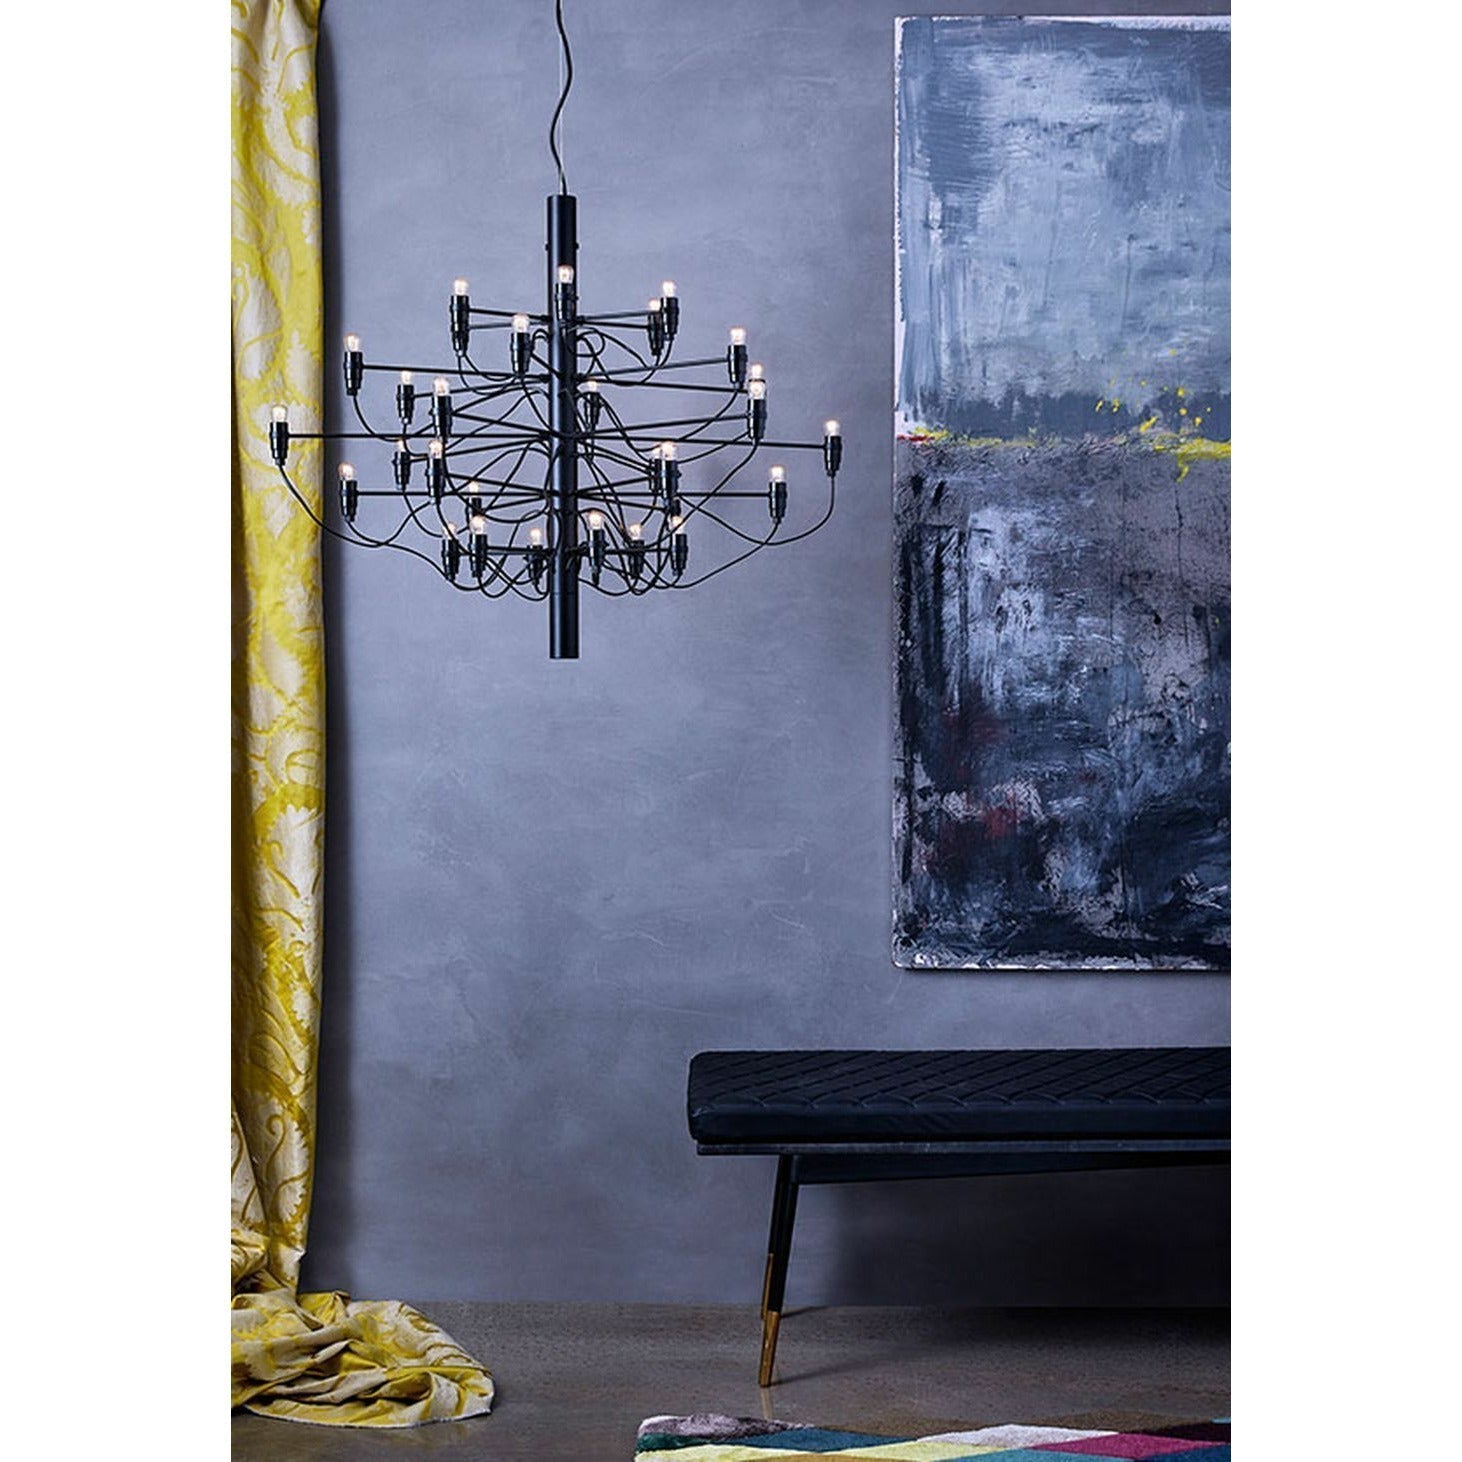 Flos 2097/50 Clear Chandelier, messing